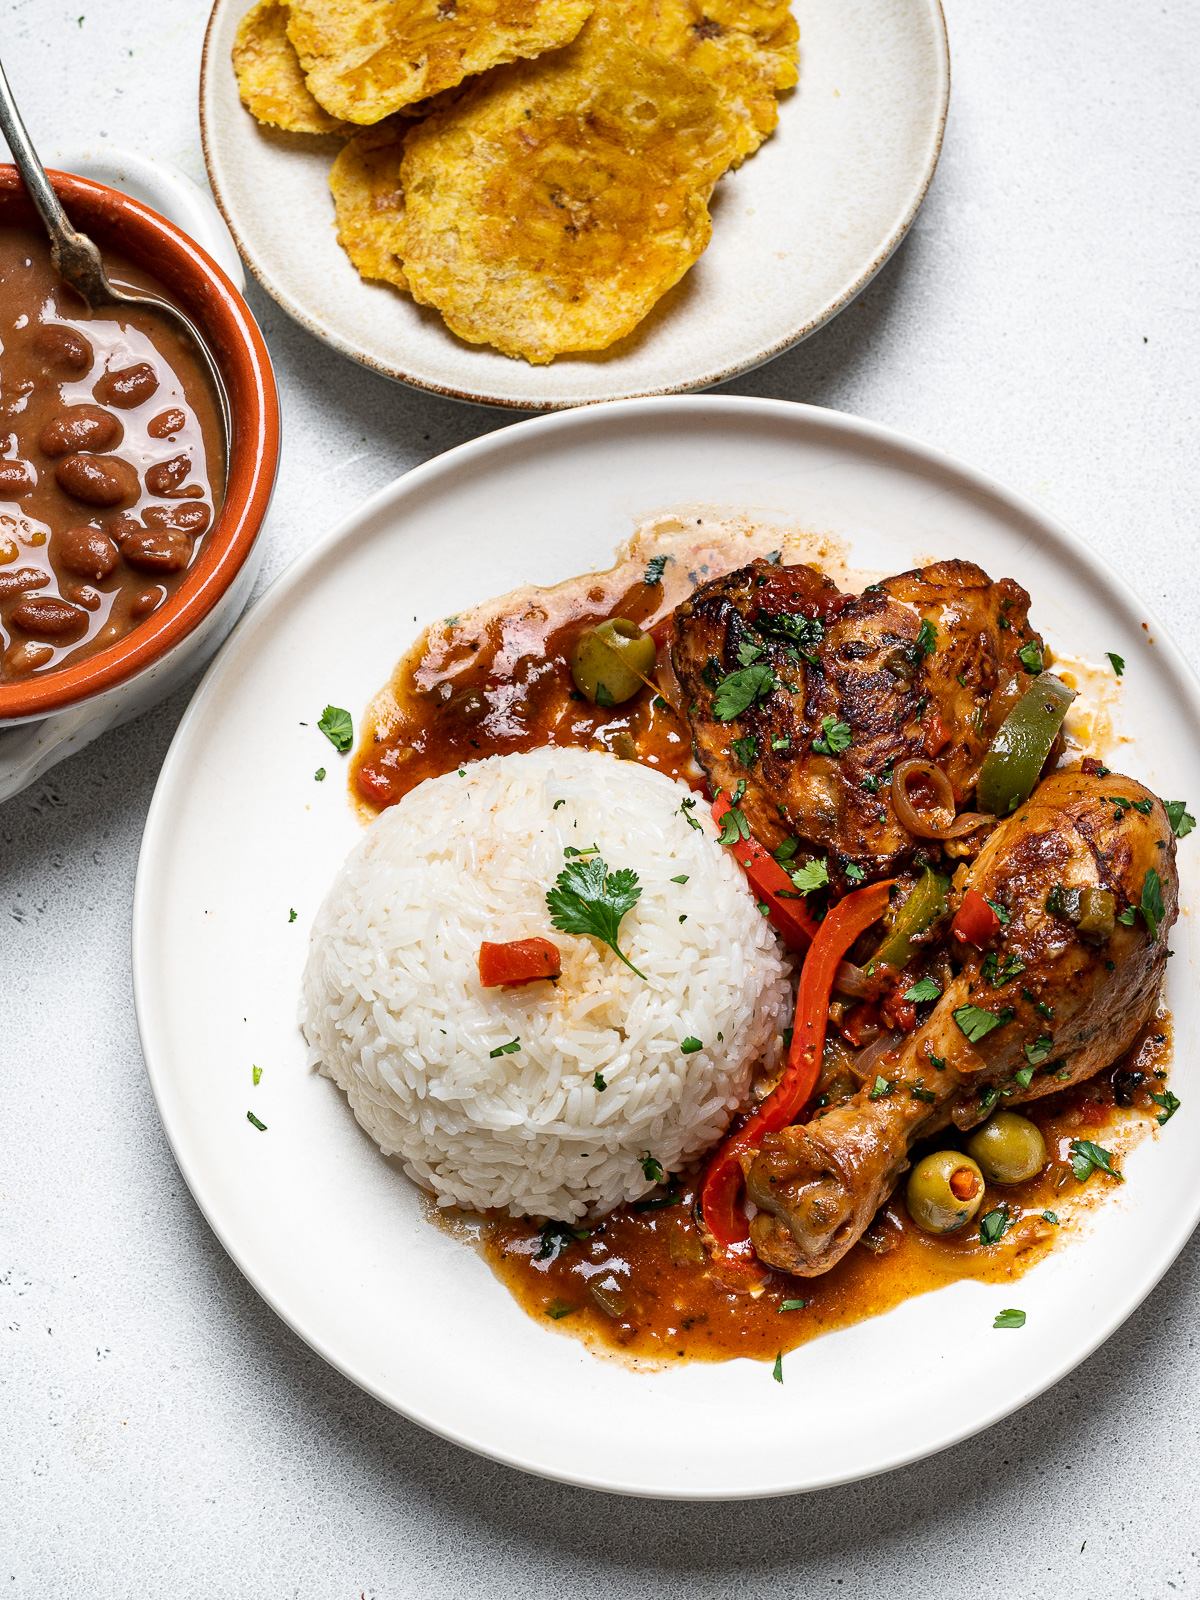 pollo guisado served on plate alongside a mound of white rice and a bowl of beans and tostones on the side